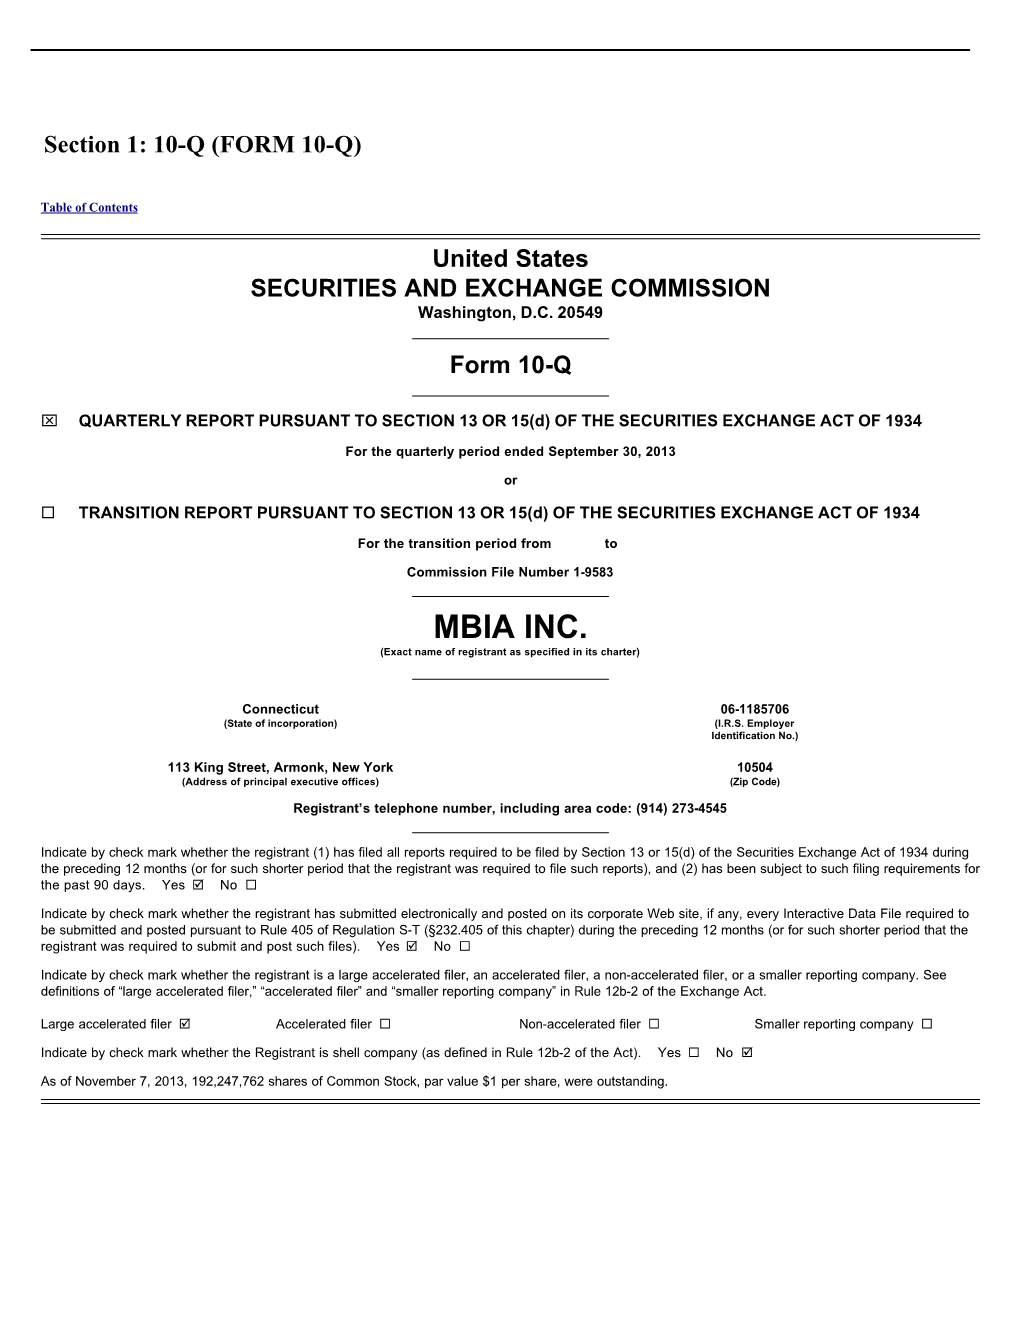 MBIA INC. (Exact Name of Registrant As Specified in Its Charter)